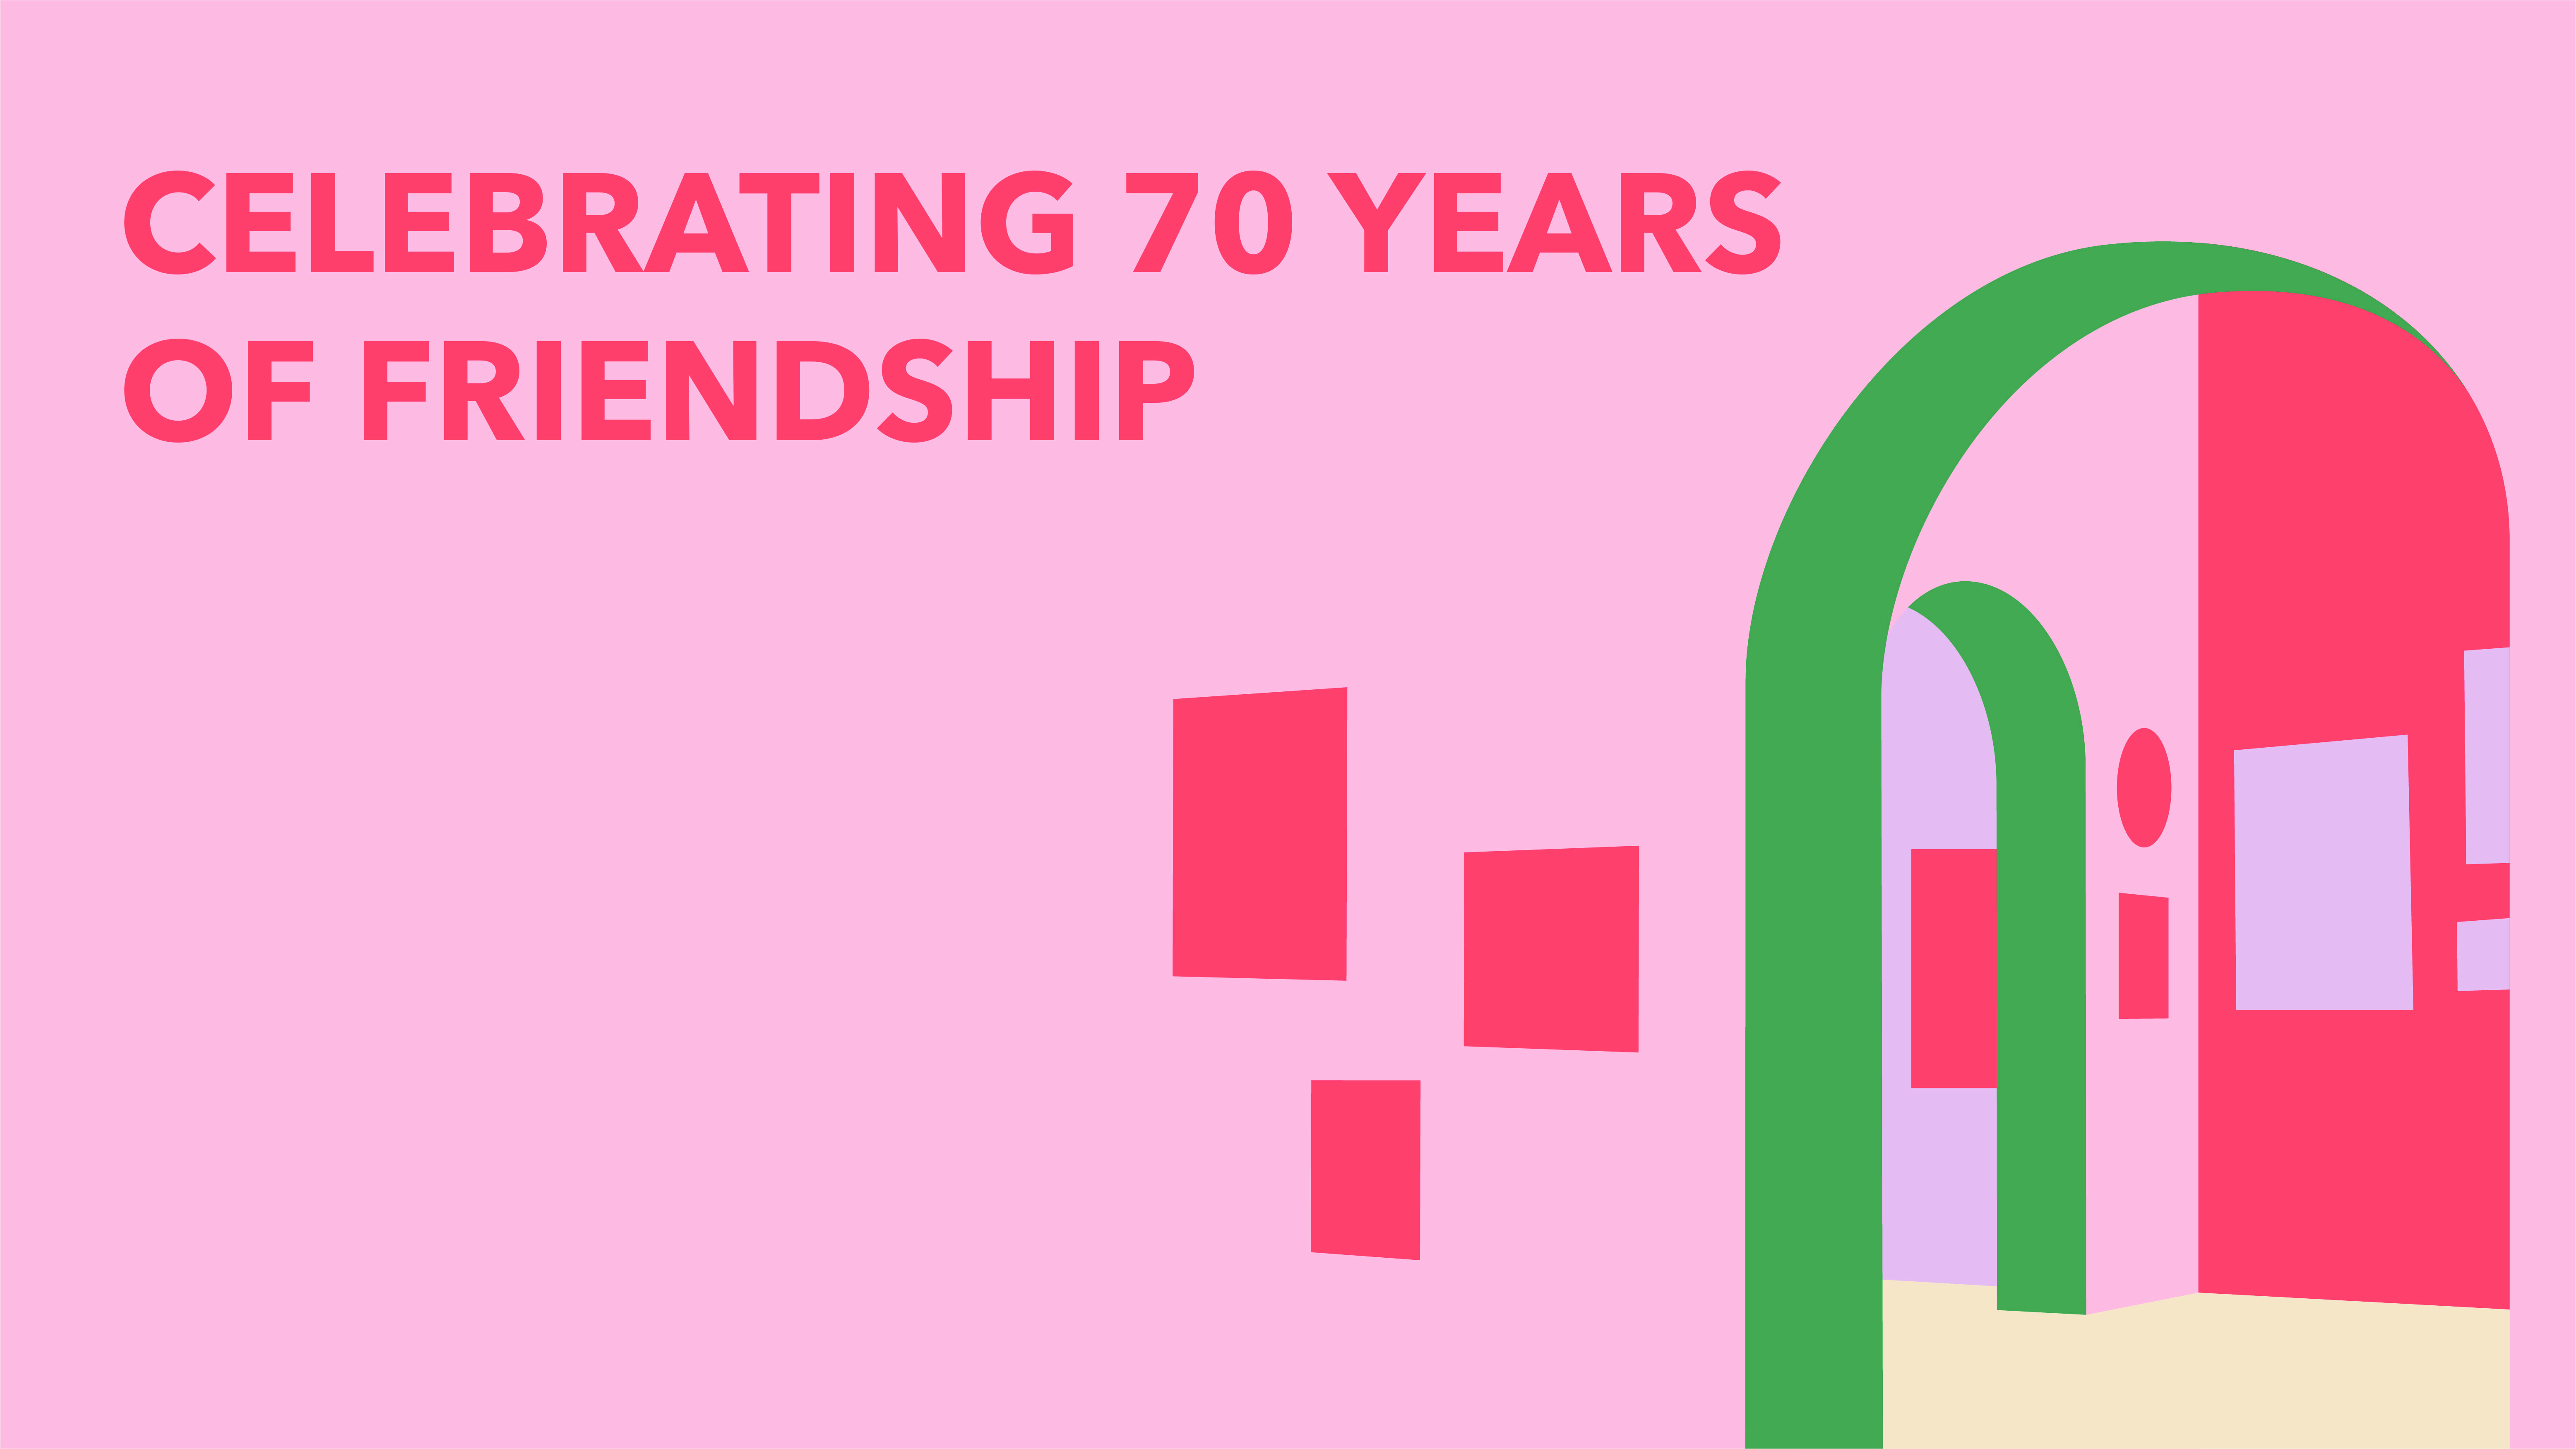 Celebrating 70 years of the Friends 